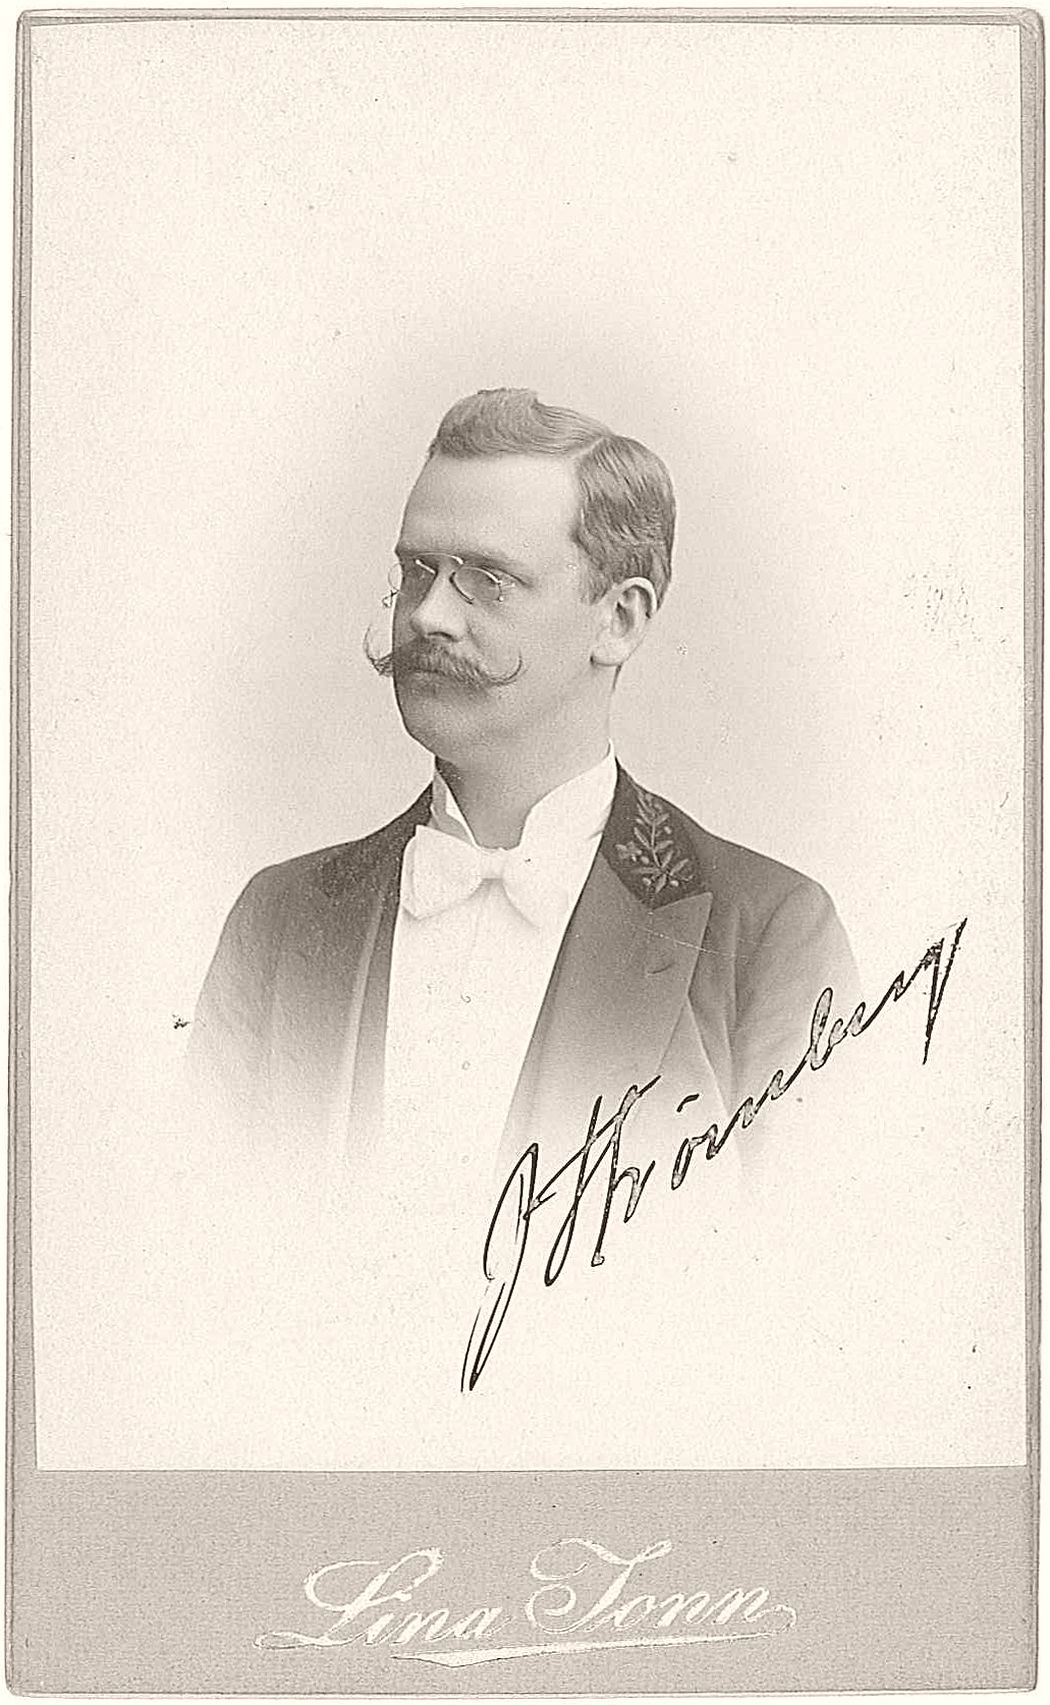 Johannes Strömberg (1868-1916), during the years 1898-1916 principal/head master of "Lunds Privata Elementarskola" (a gymnasium in Lund, later to be renamed "Strömbergsskolan" after him; today known as Spyken).